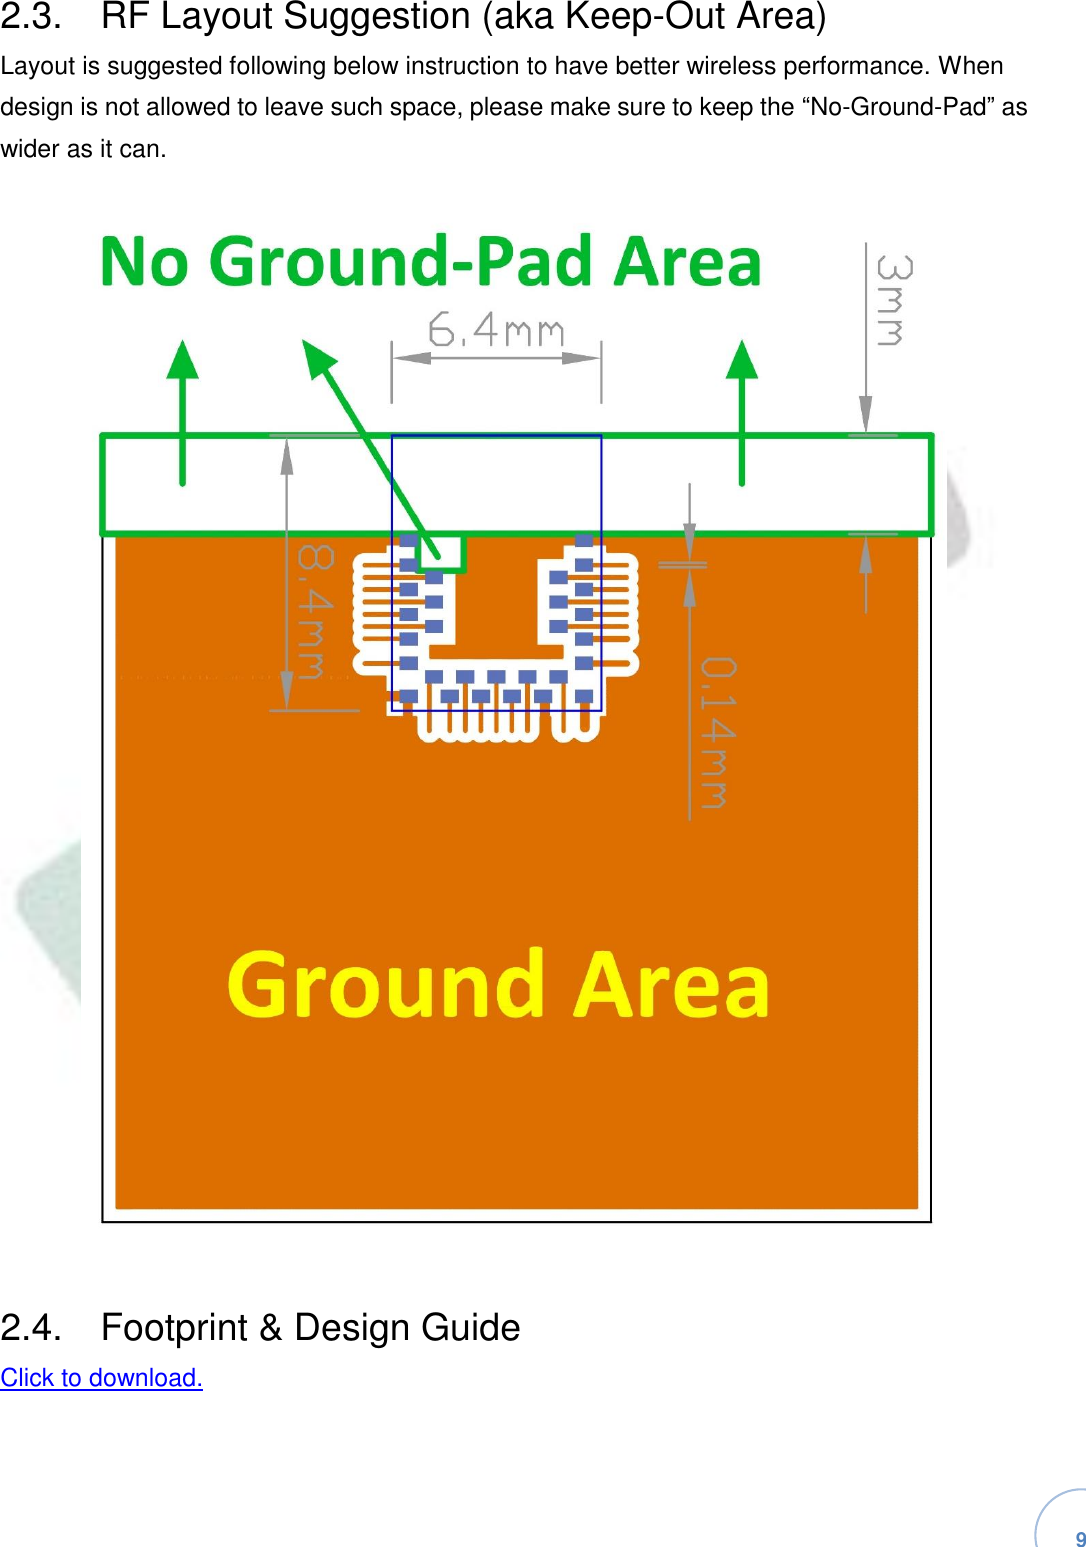   9 2.3.  RF Layout Suggestion (aka Keep-Out Area)Layout is suggested following below instruction to have better wireless performance. When design is not allowed to leave such space, please make sure to keep the “No-Ground-Pad” as wider as it can.2.4.  Footprint &amp; Design GuideClick to download.